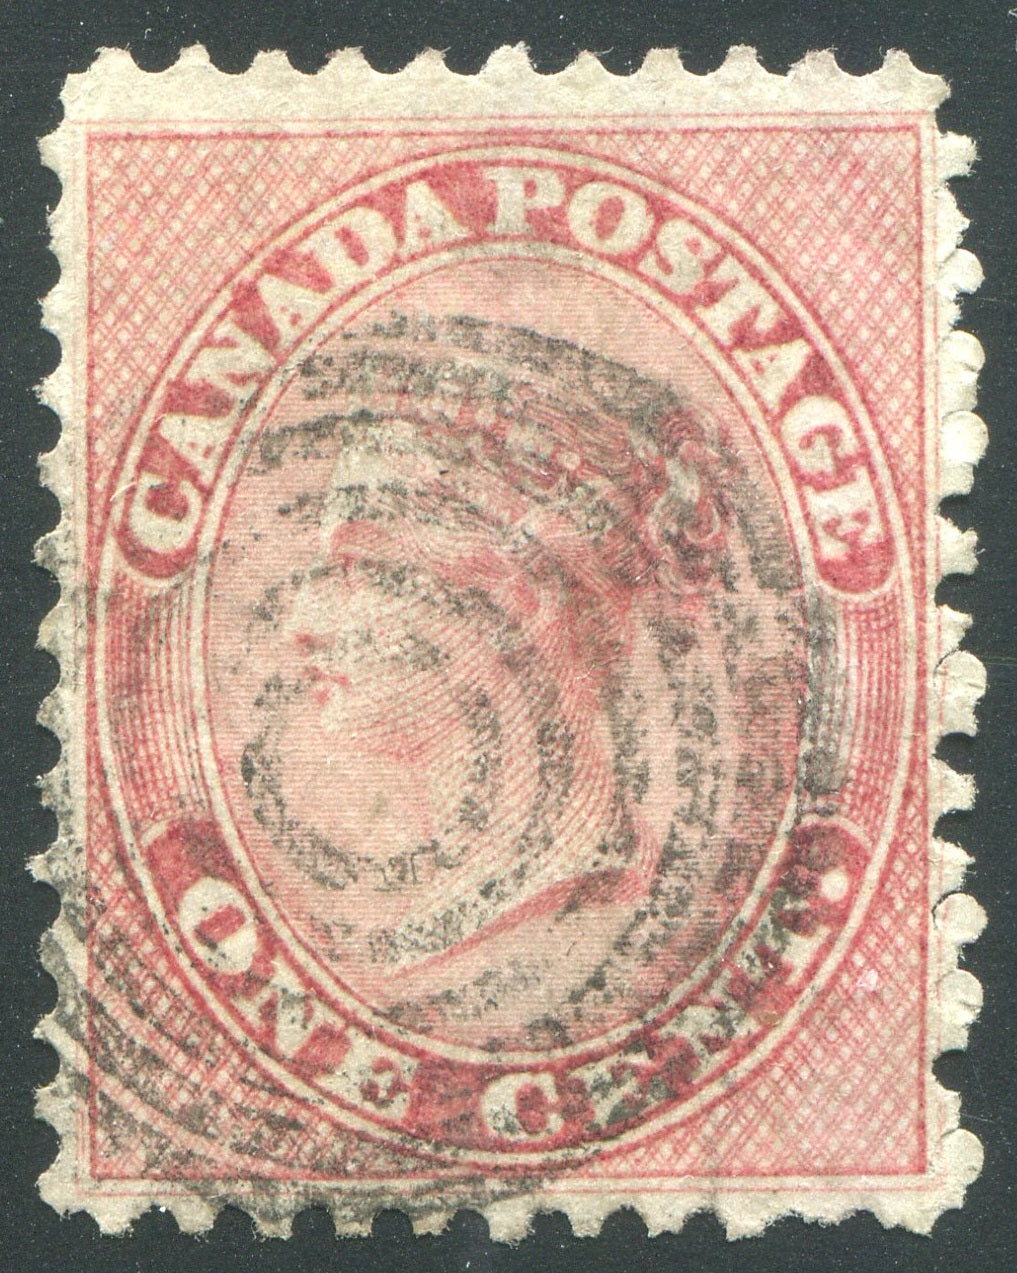 0014CA2308 - Canada #14x - Used Major Re-Entry